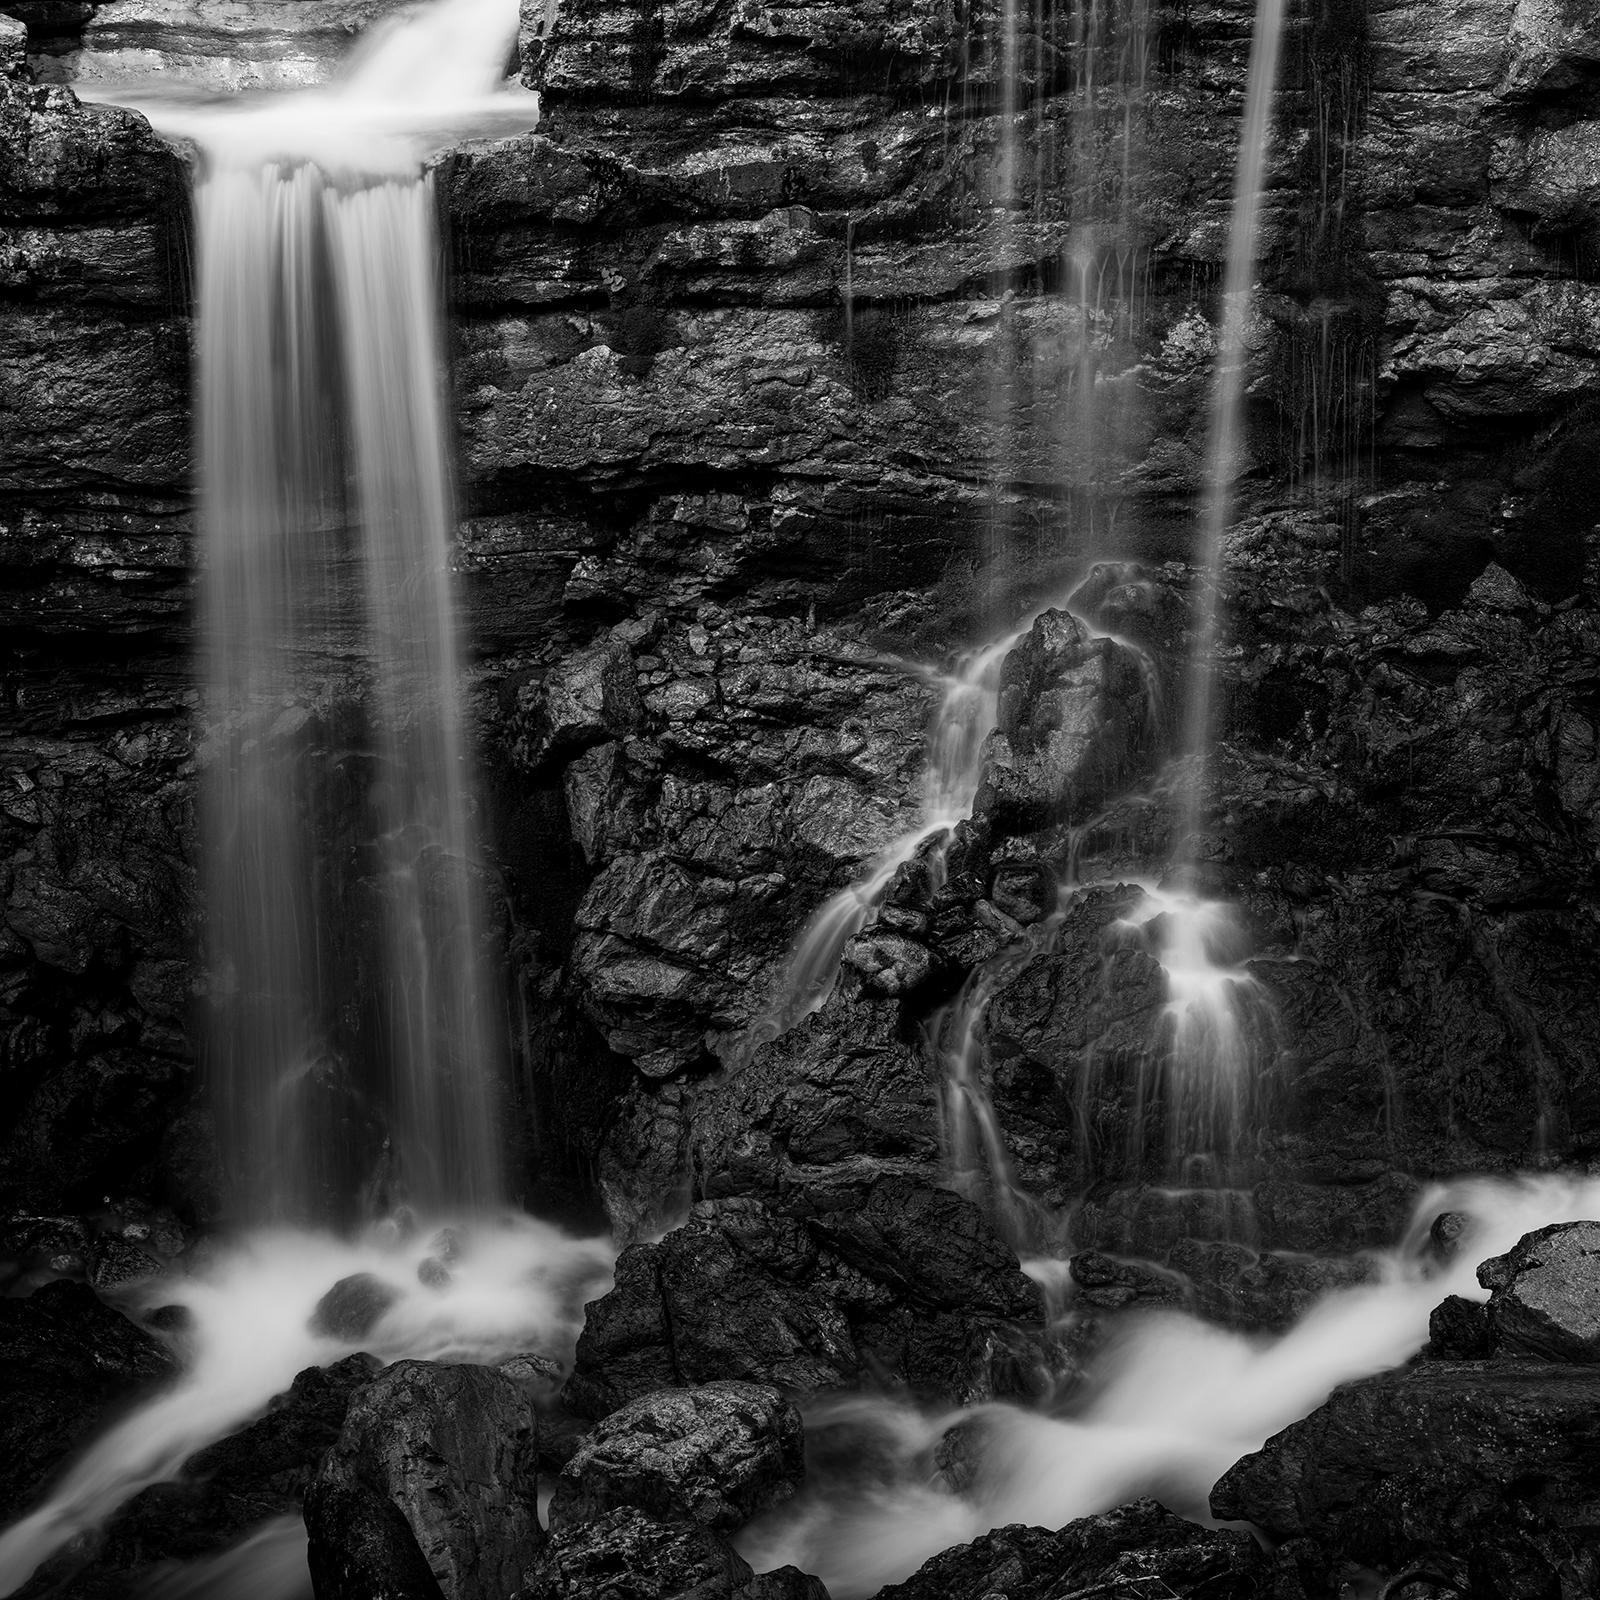 Kuhflucht, lower Waterfall, Germany, black and white art landscape photography For Sale 5